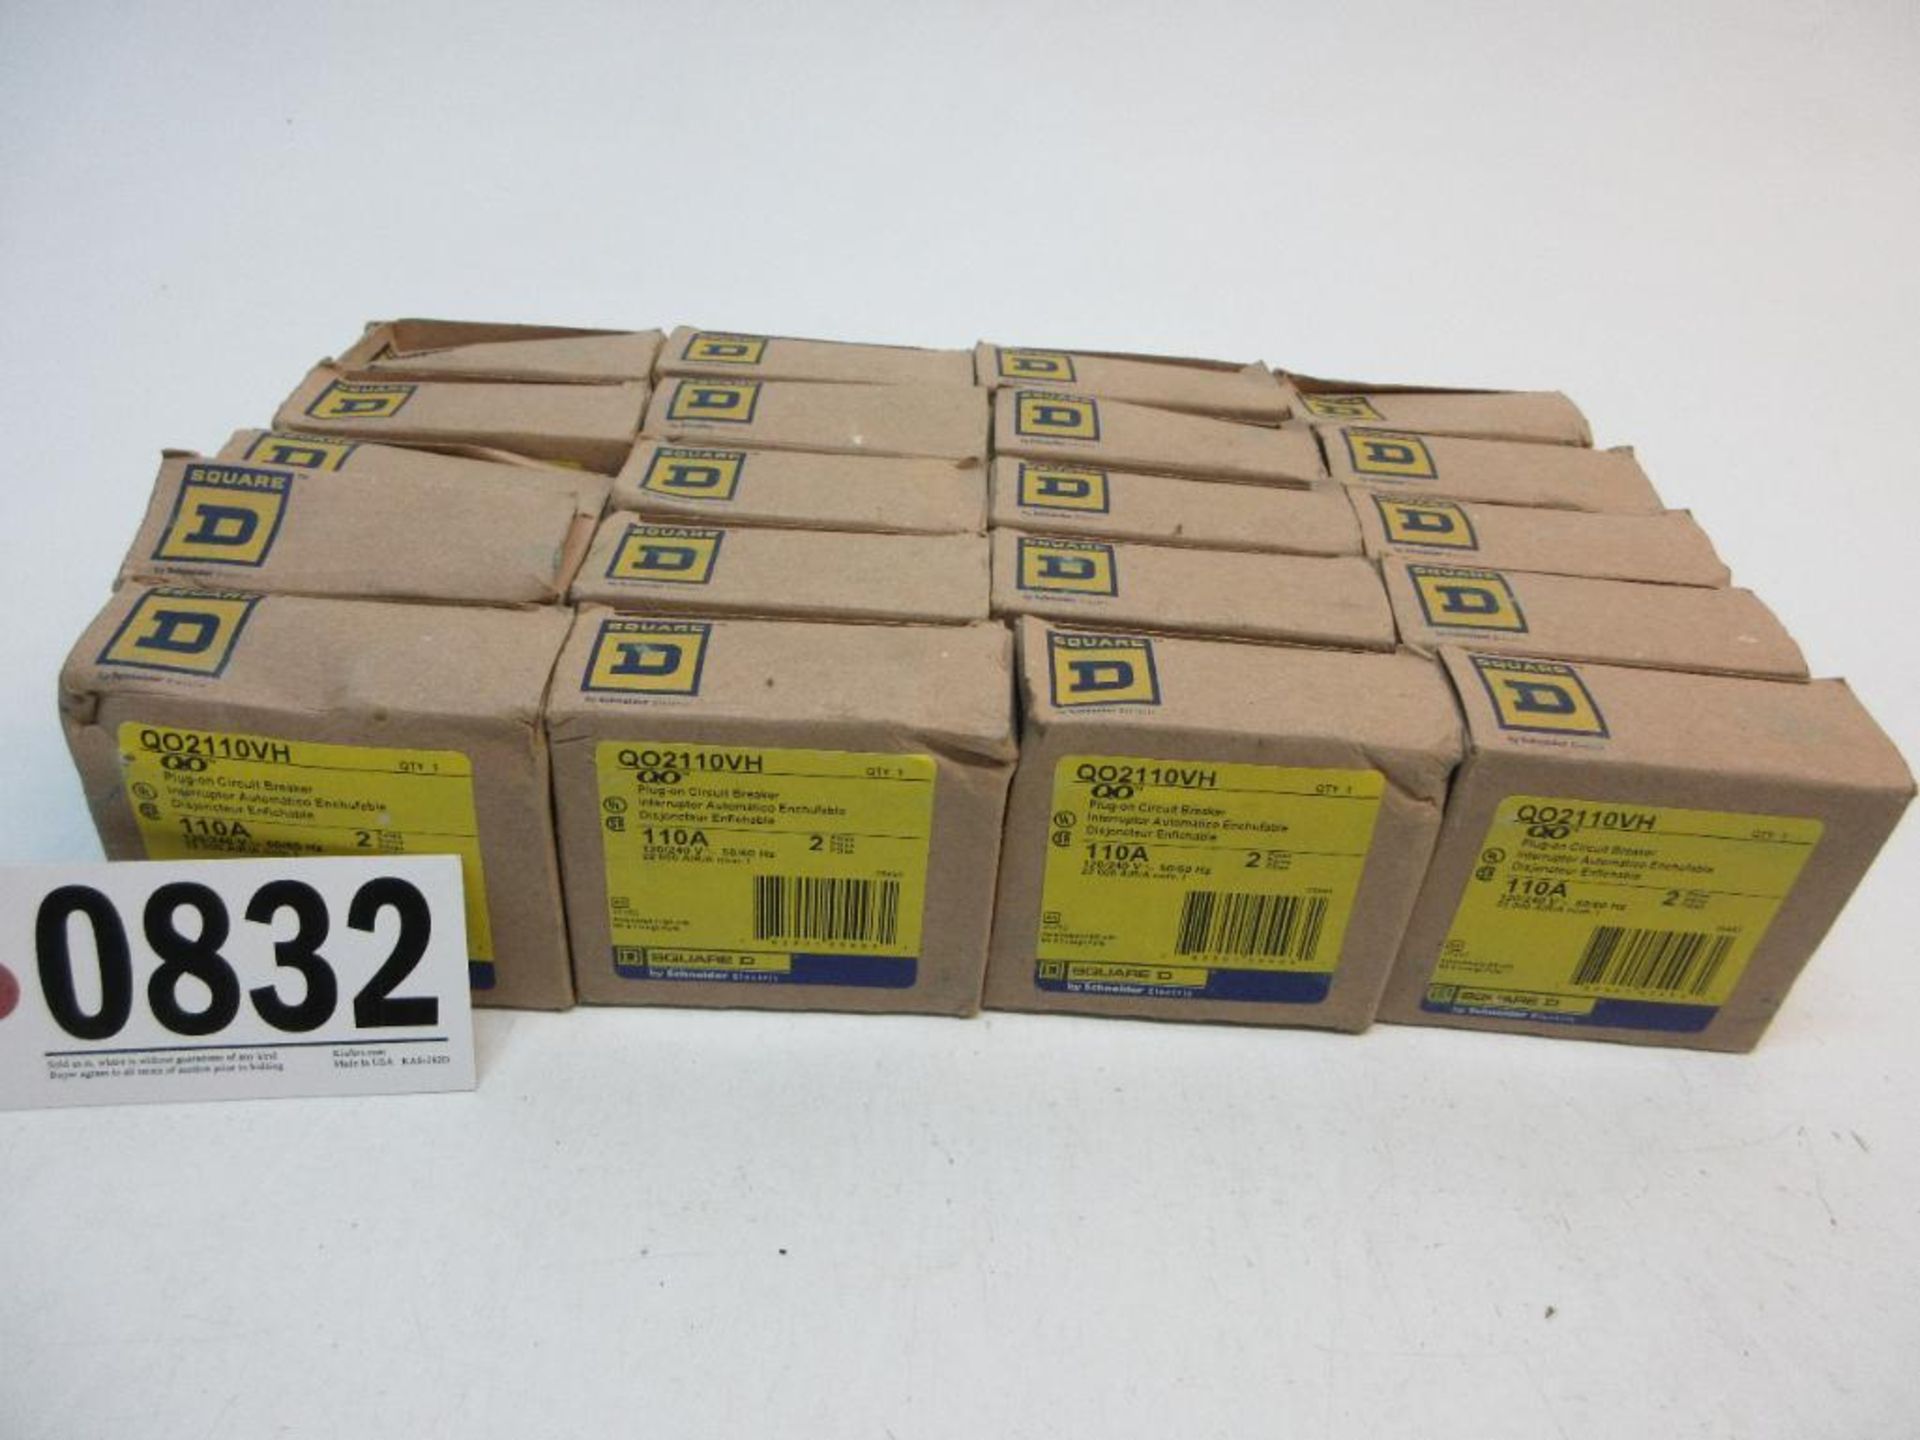 (20) SQUARE D QO2110VH PLUG-ON CIRCUIT BREAKER 110A 2 POLE NEW (THIS LOT IS FOB CAMARILLO CA) - (The